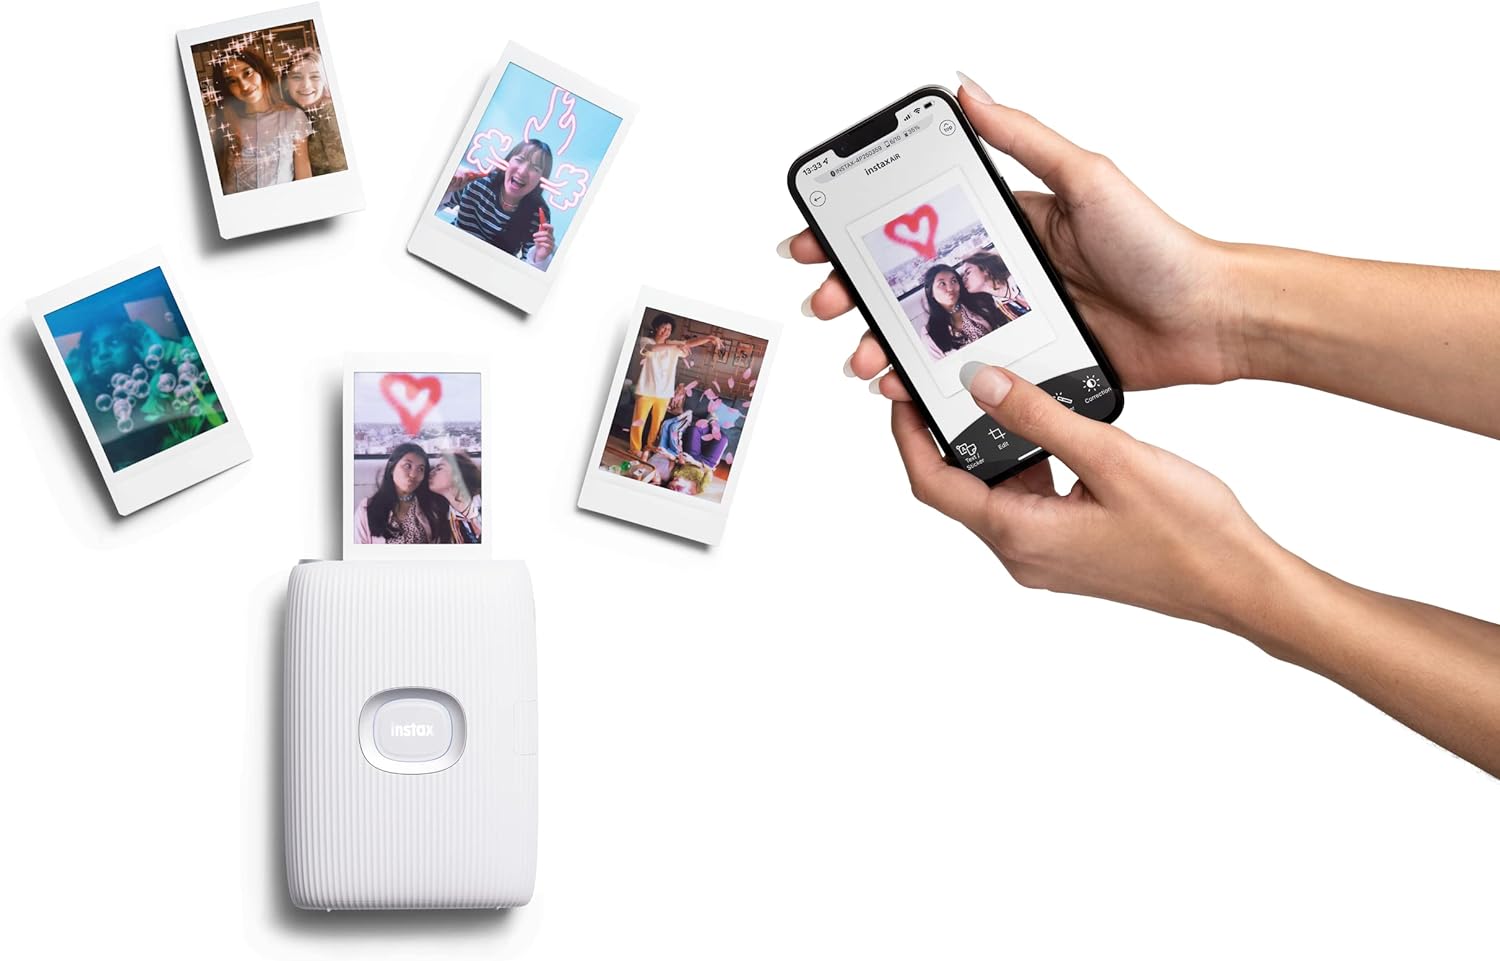 Polaroid Hi-Print review: Print your iPhone photos quickly and